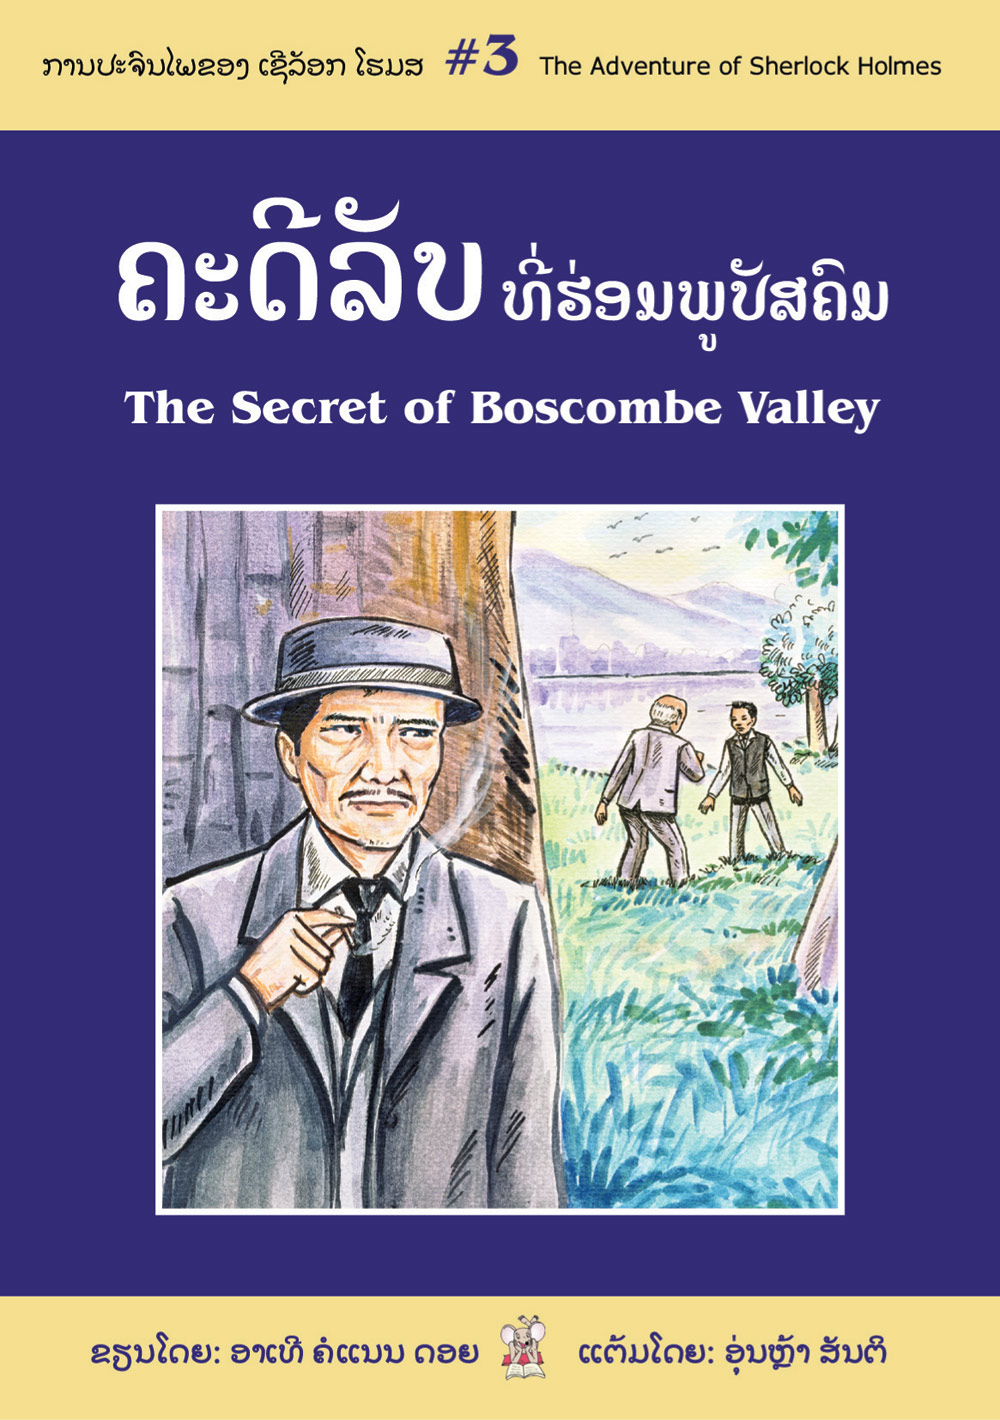 The Secret of Boscombe Valley large book cover, published in Lao and English